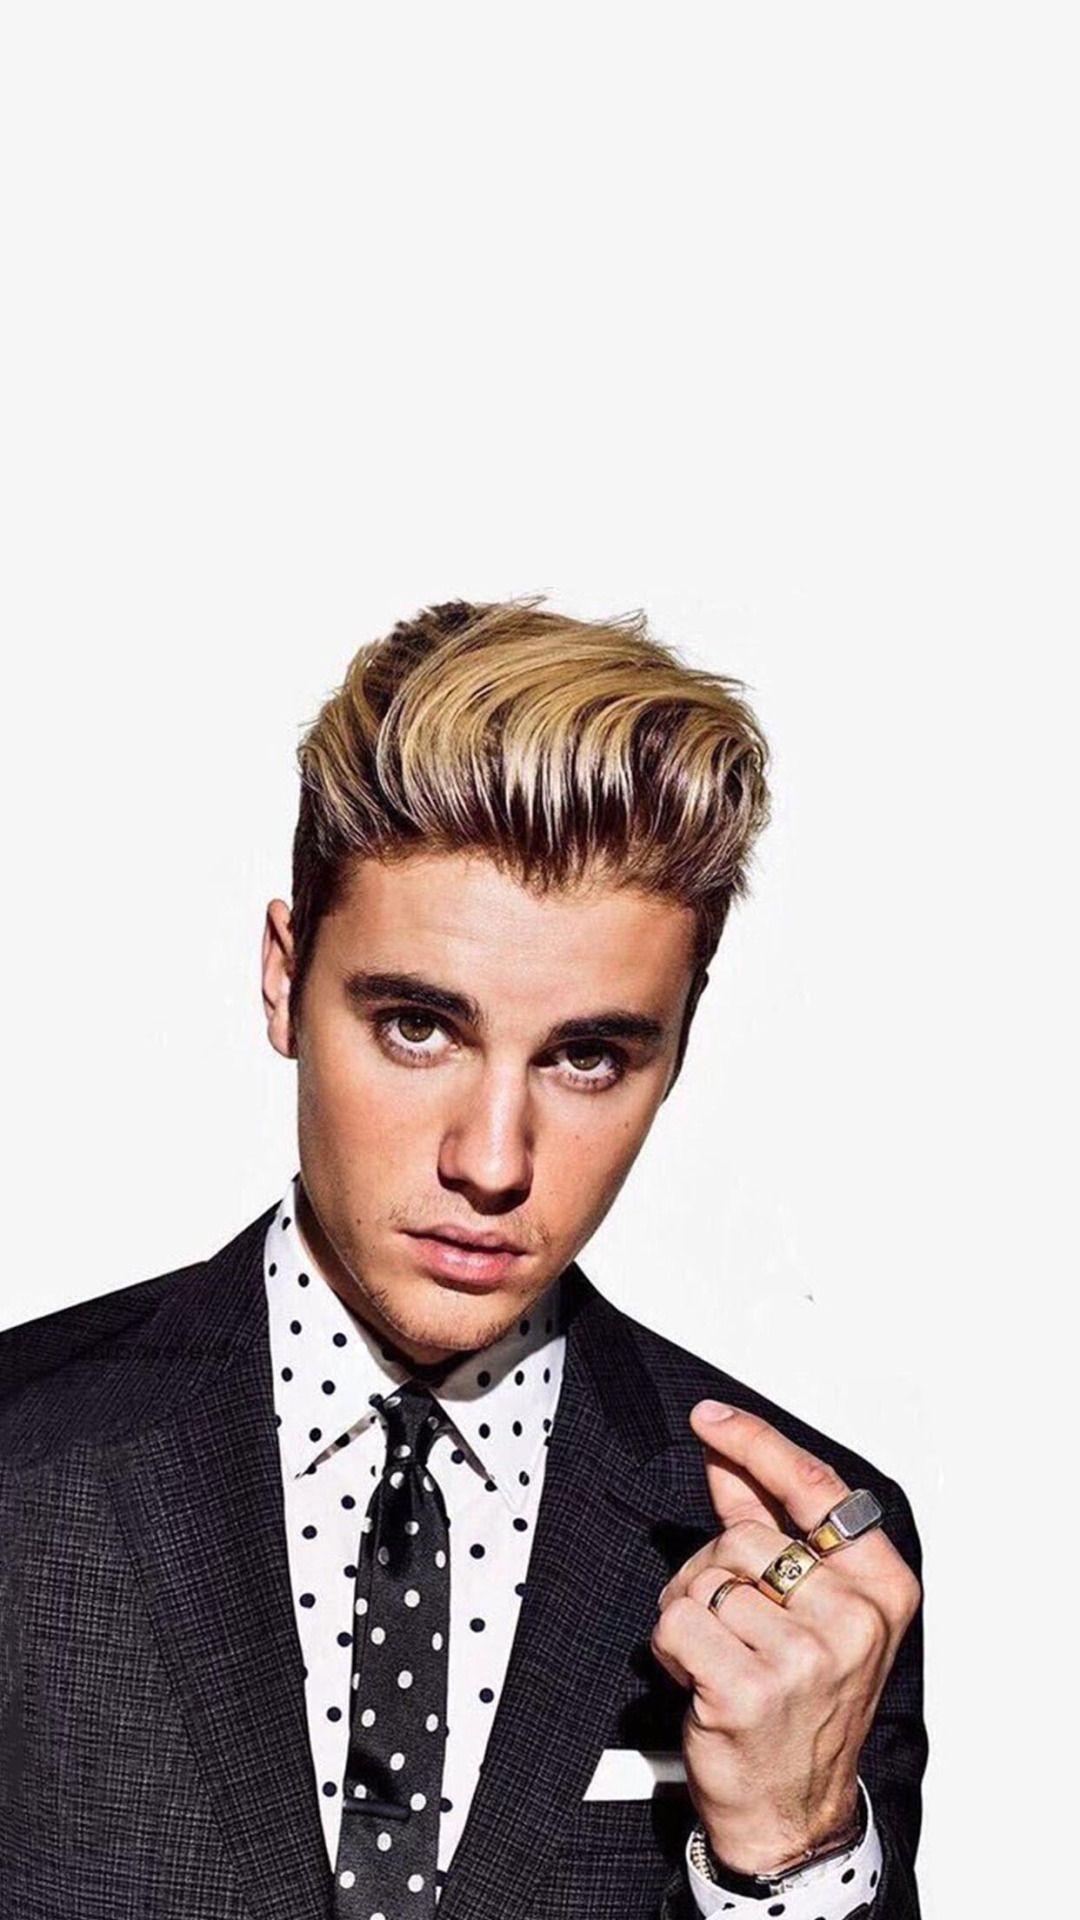 Justin Bieber iPhone Wallpaper. Best Image Collections HD